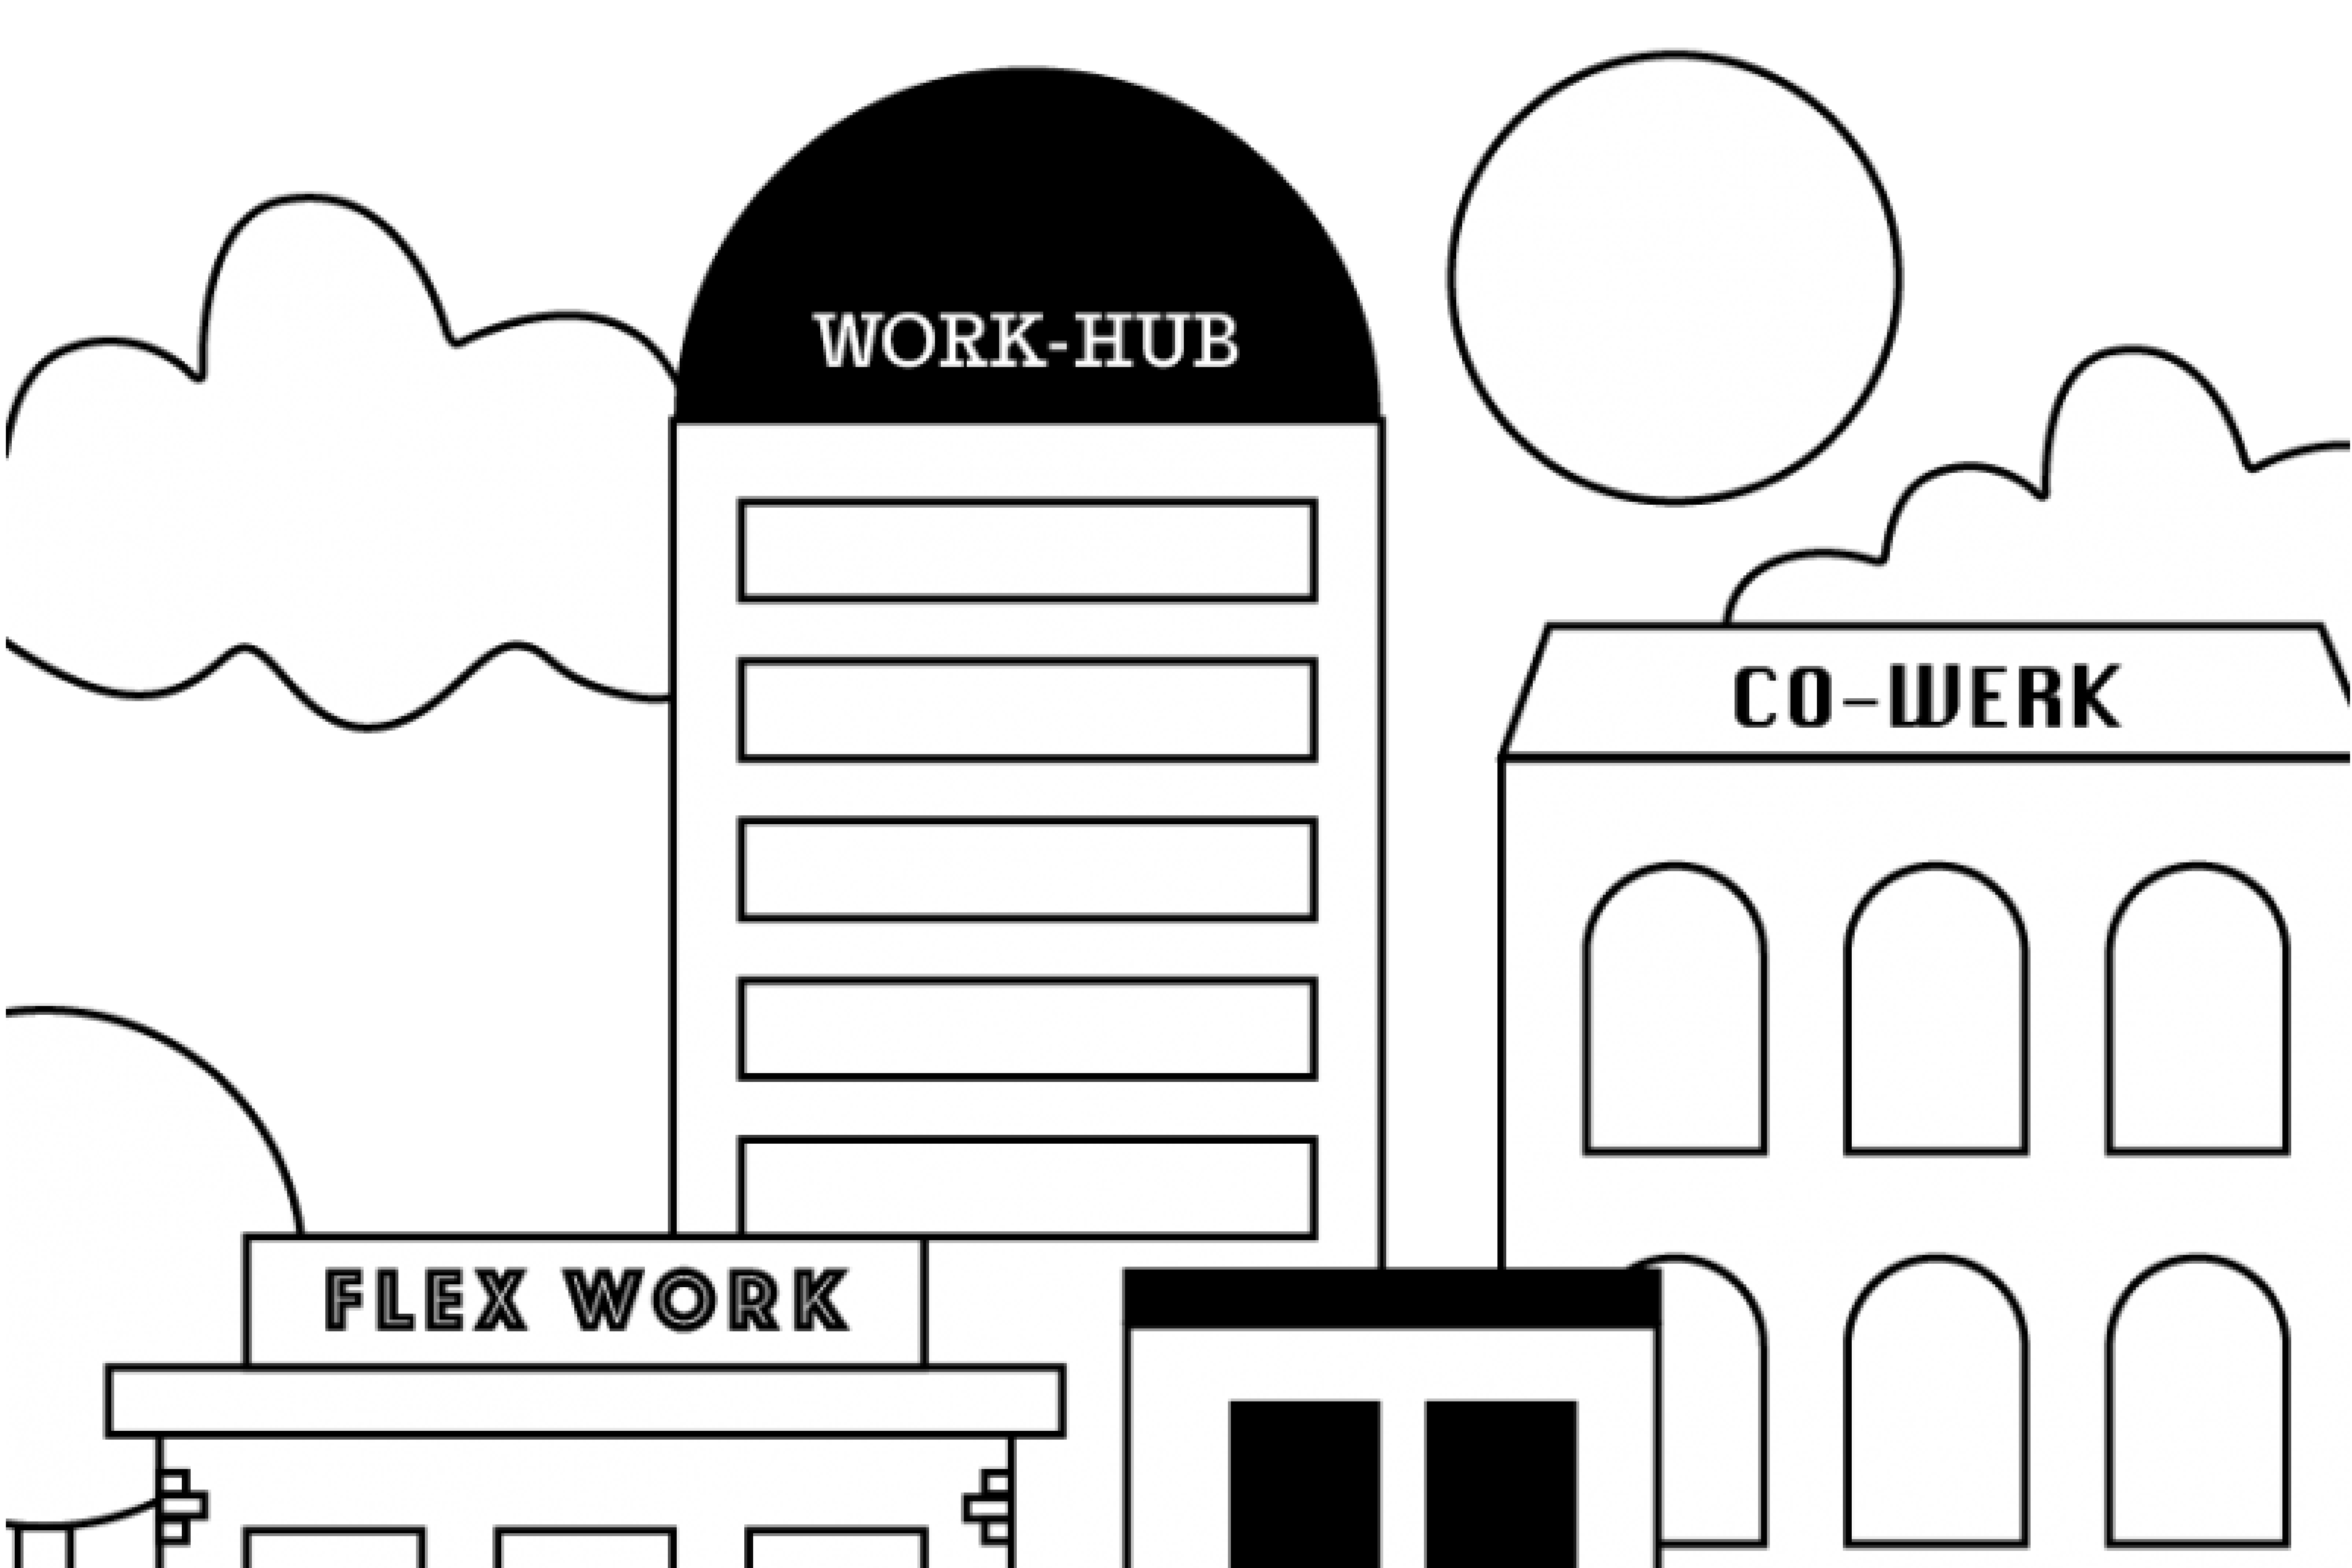 Positioning your coworking brand in its own category